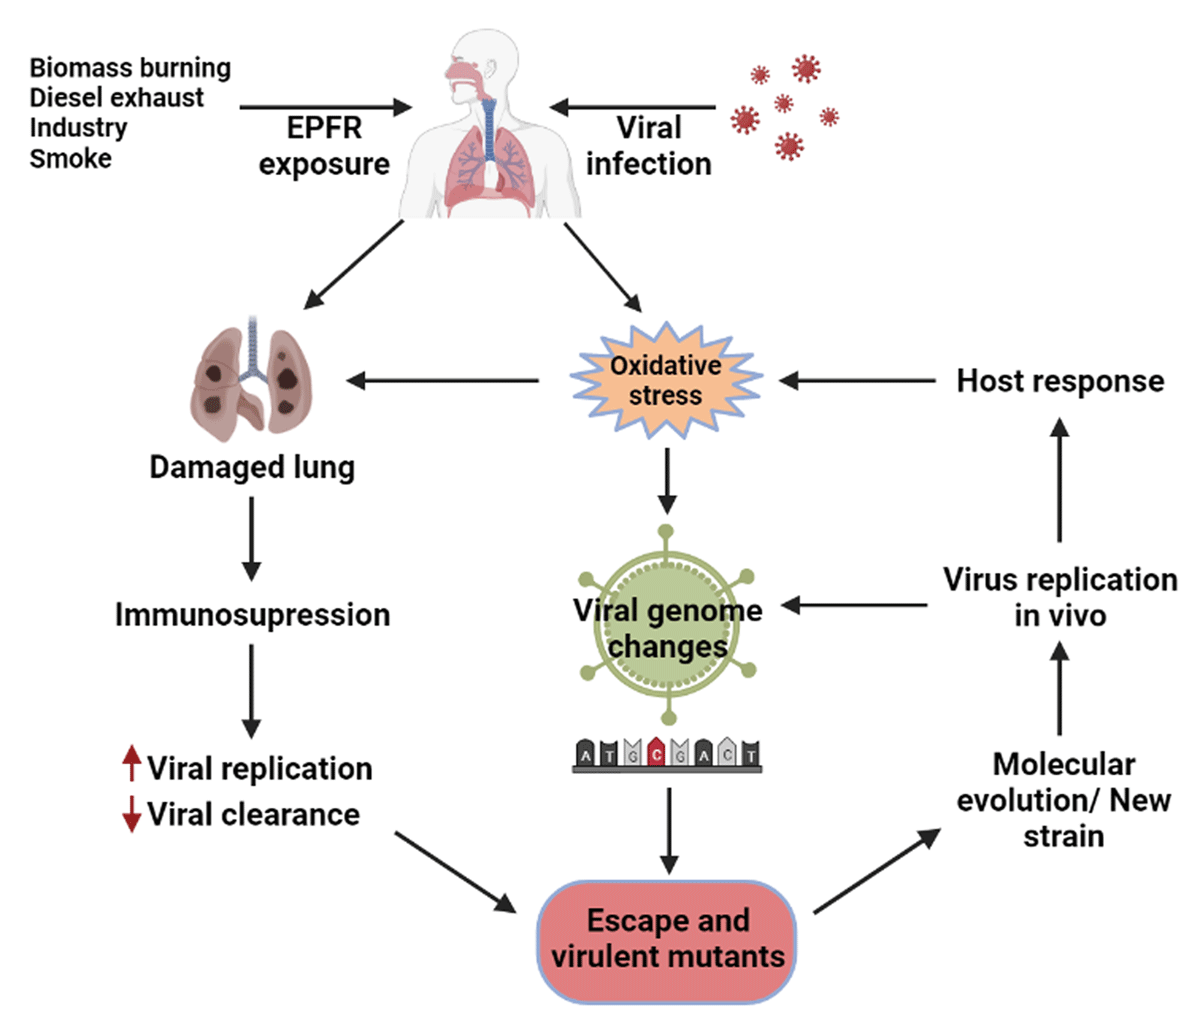 Potential roles of EPFRs in enhancing viral morbidity and mortality